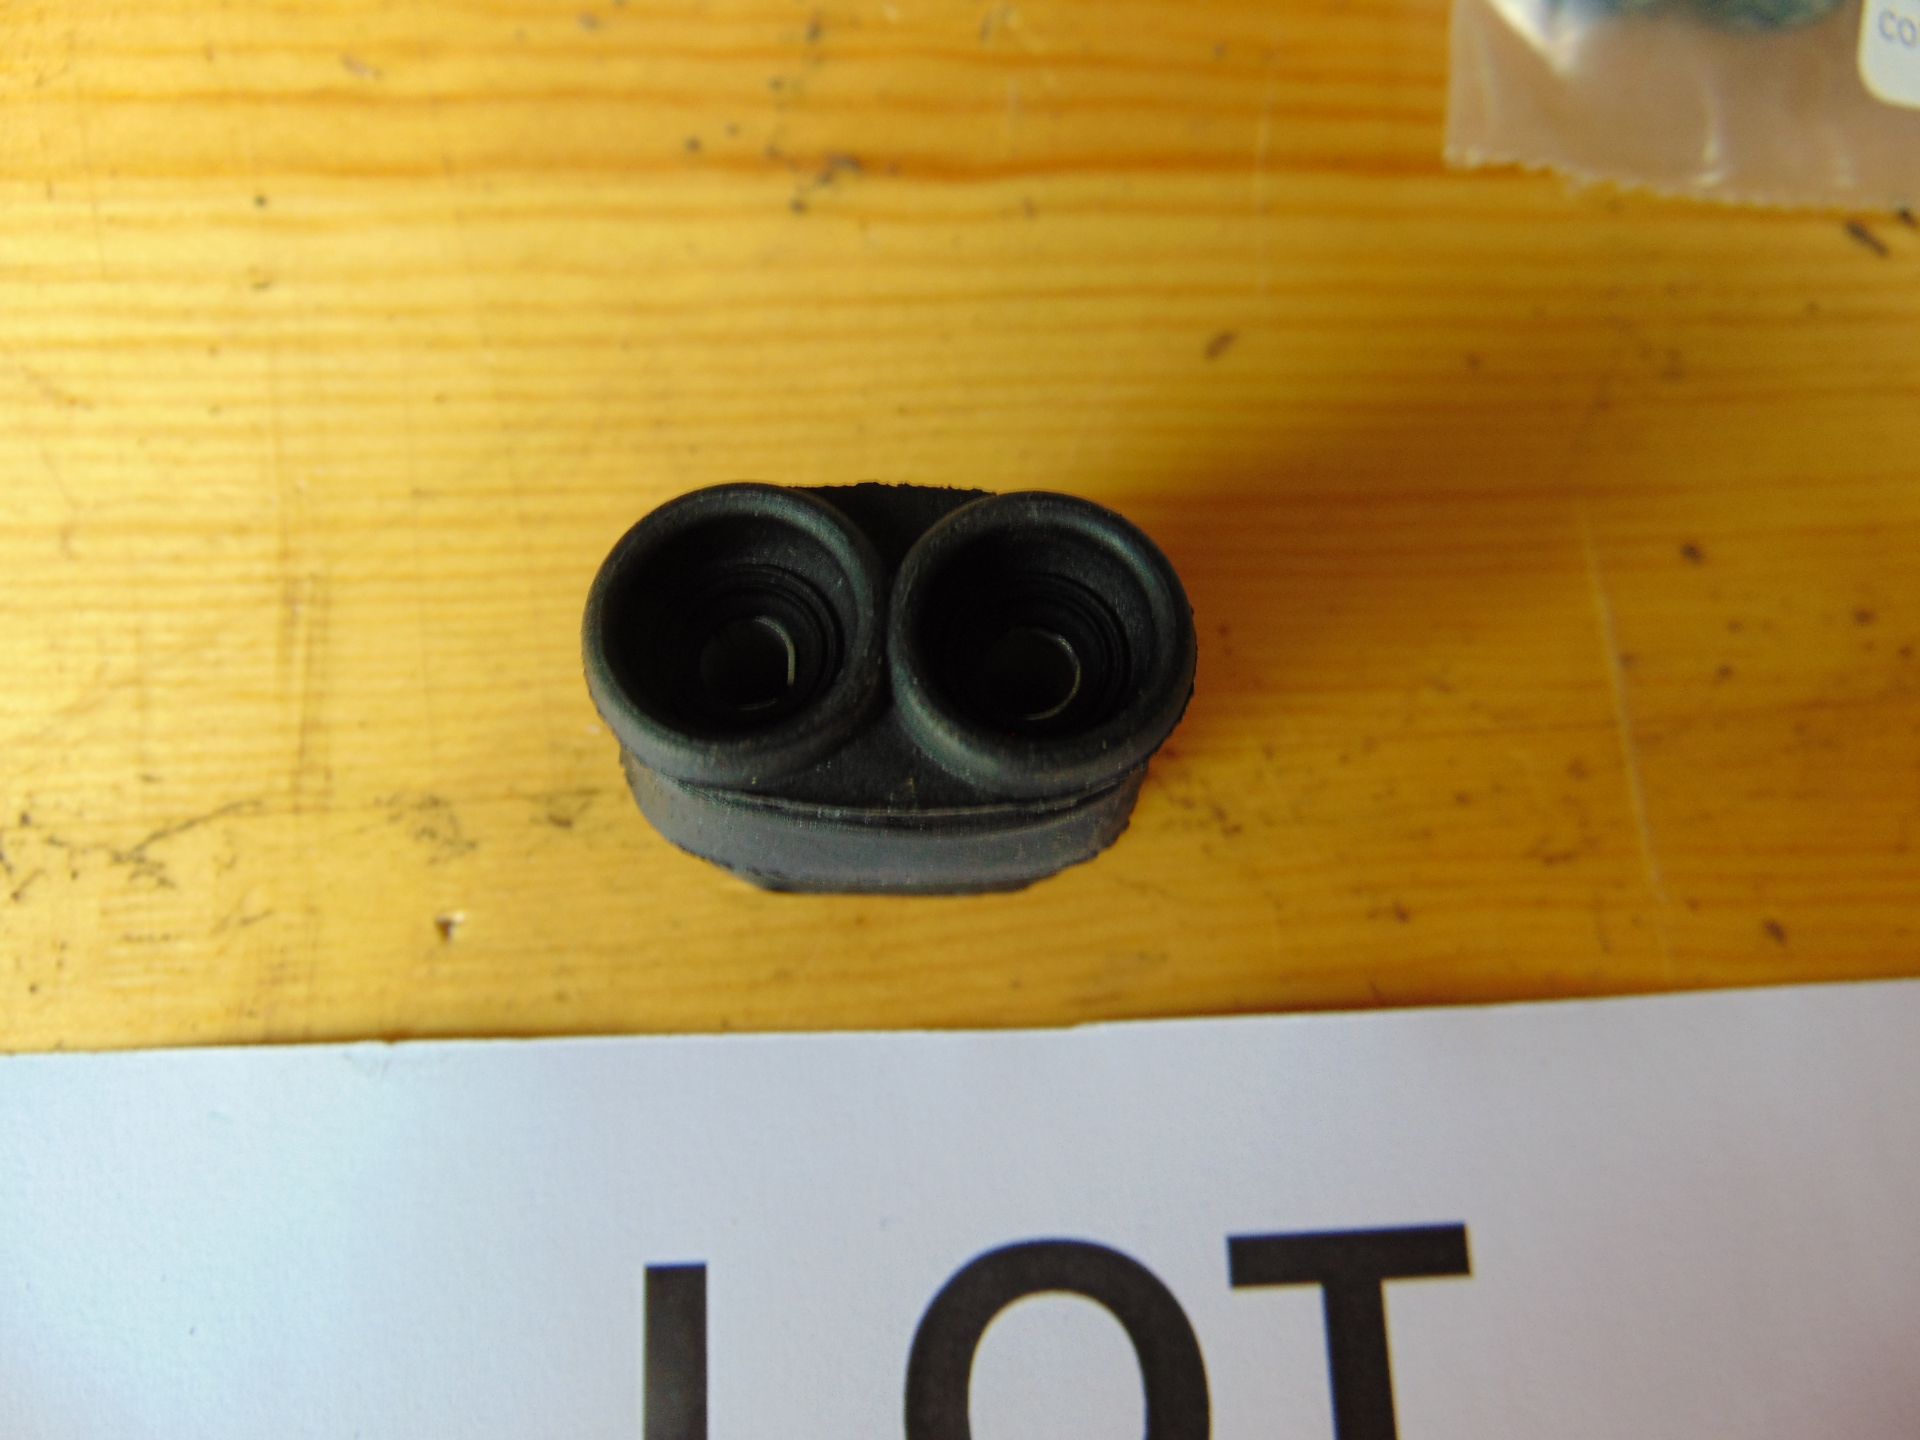 20x Rare New Unused Vehicle Electrical Double Bullet Connectors cost £3.64 each - Image 2 of 5